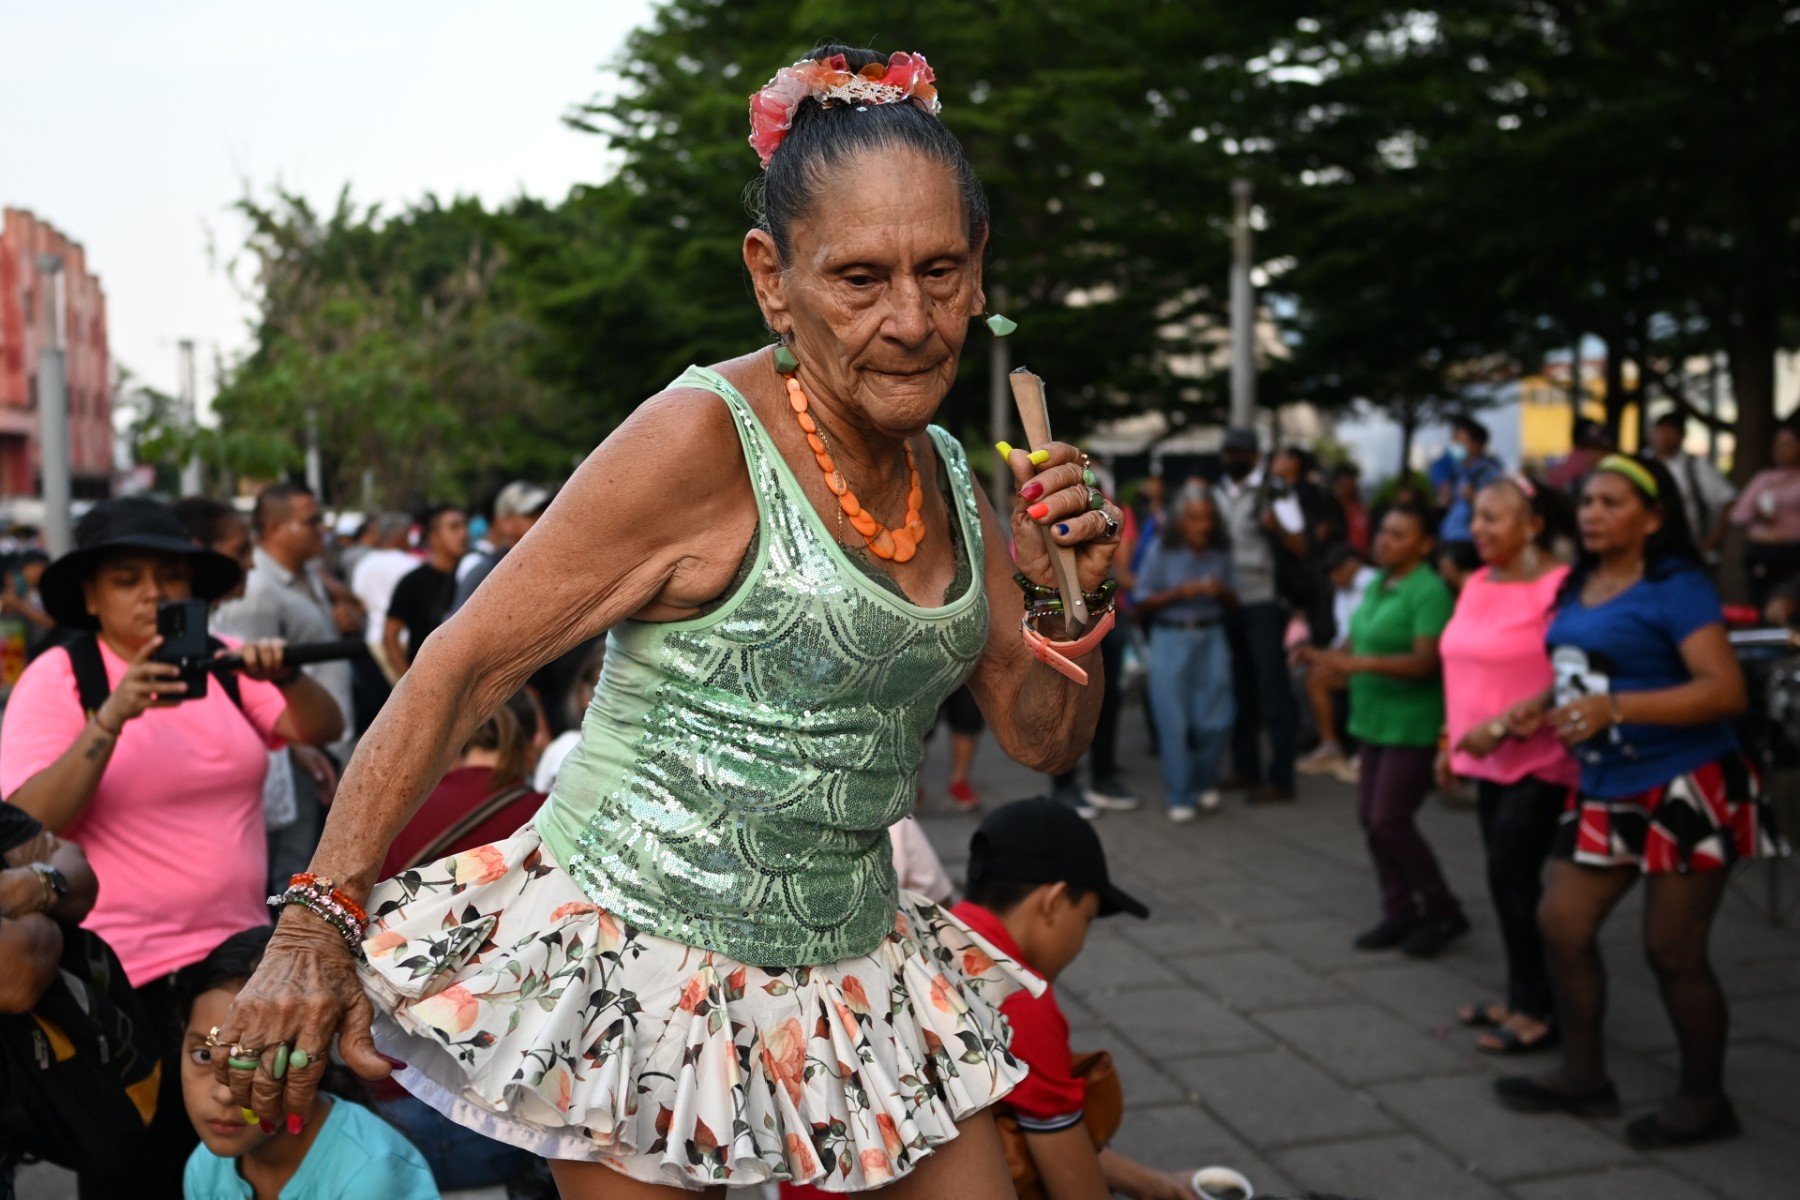 Sonia Isabel Aguilar, 75, a dancer known as Yajaira, has fun doing one of her dance routines in front of some spectators in Plaza Libertad, where people gather in the evenings to dance and play music at the historic center of San Salvador, on May 12, 2023. - The "war" against gangs, launched 14 months ago by President Nayib Bukele, has created a safe environment in the country, encouraging people to occupy public spaces.